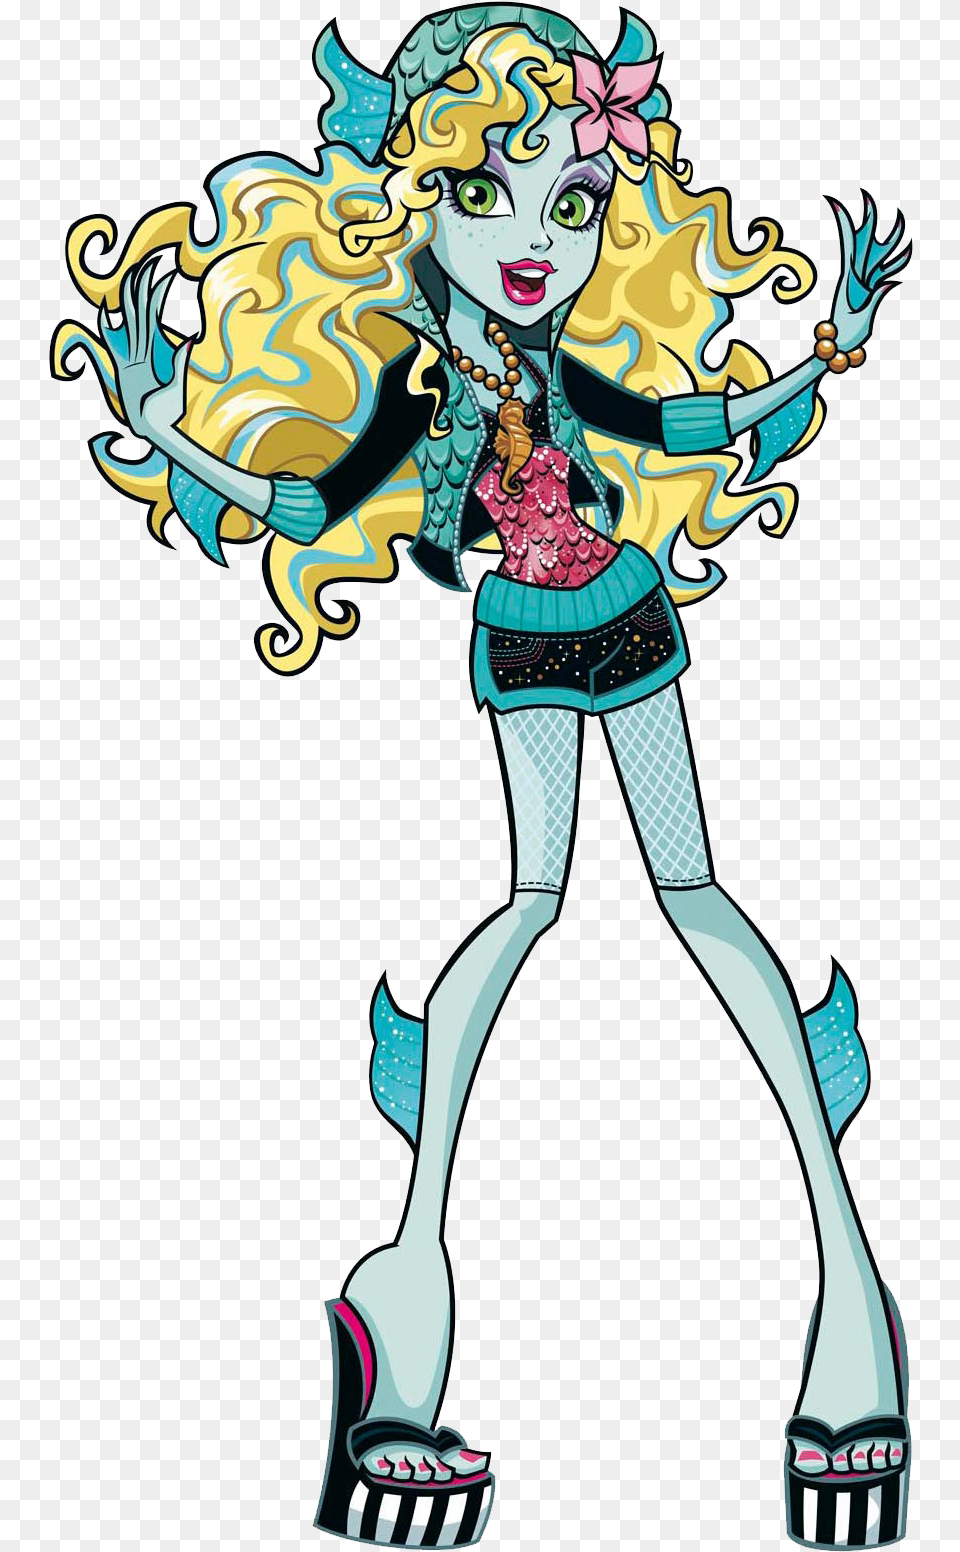 Lagoona Blue Is The Daughter Of A Sea Creature Lagoona Blue Monster High Characters, Person, Art, Graphics, Publication Png Image